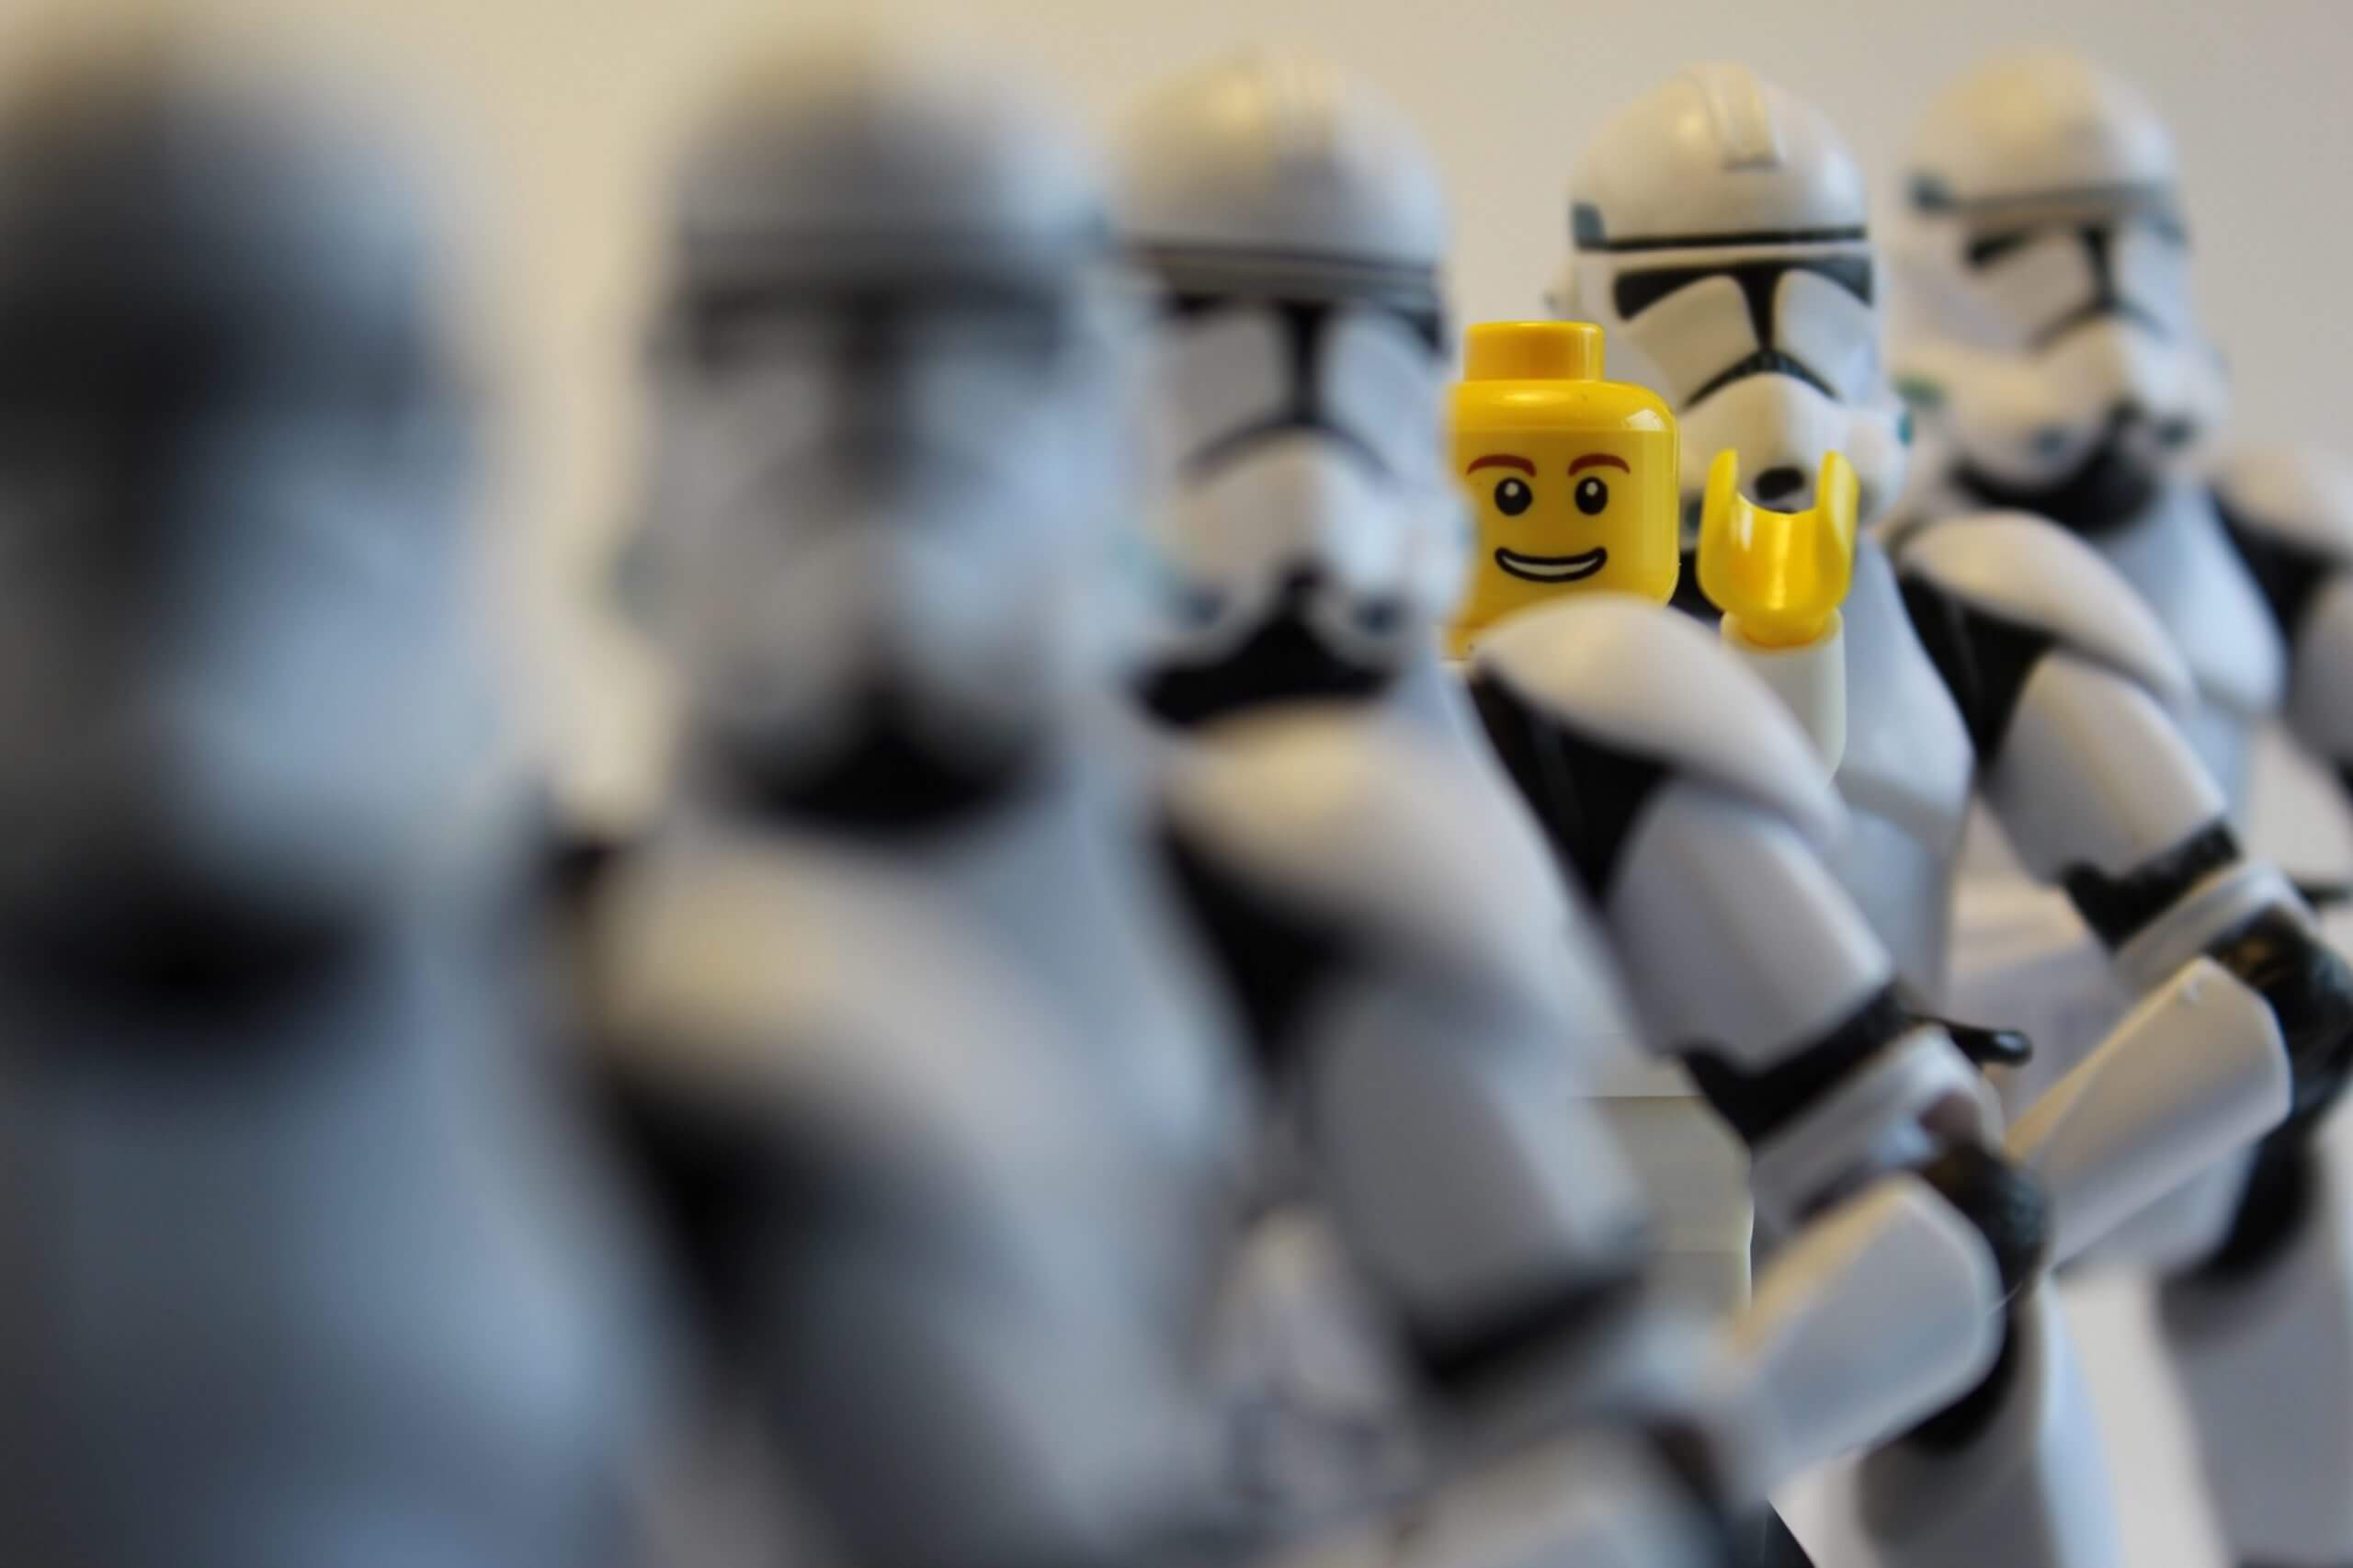 yellow lego piece amongst stormtrooper lego pieces showing impact of personalization